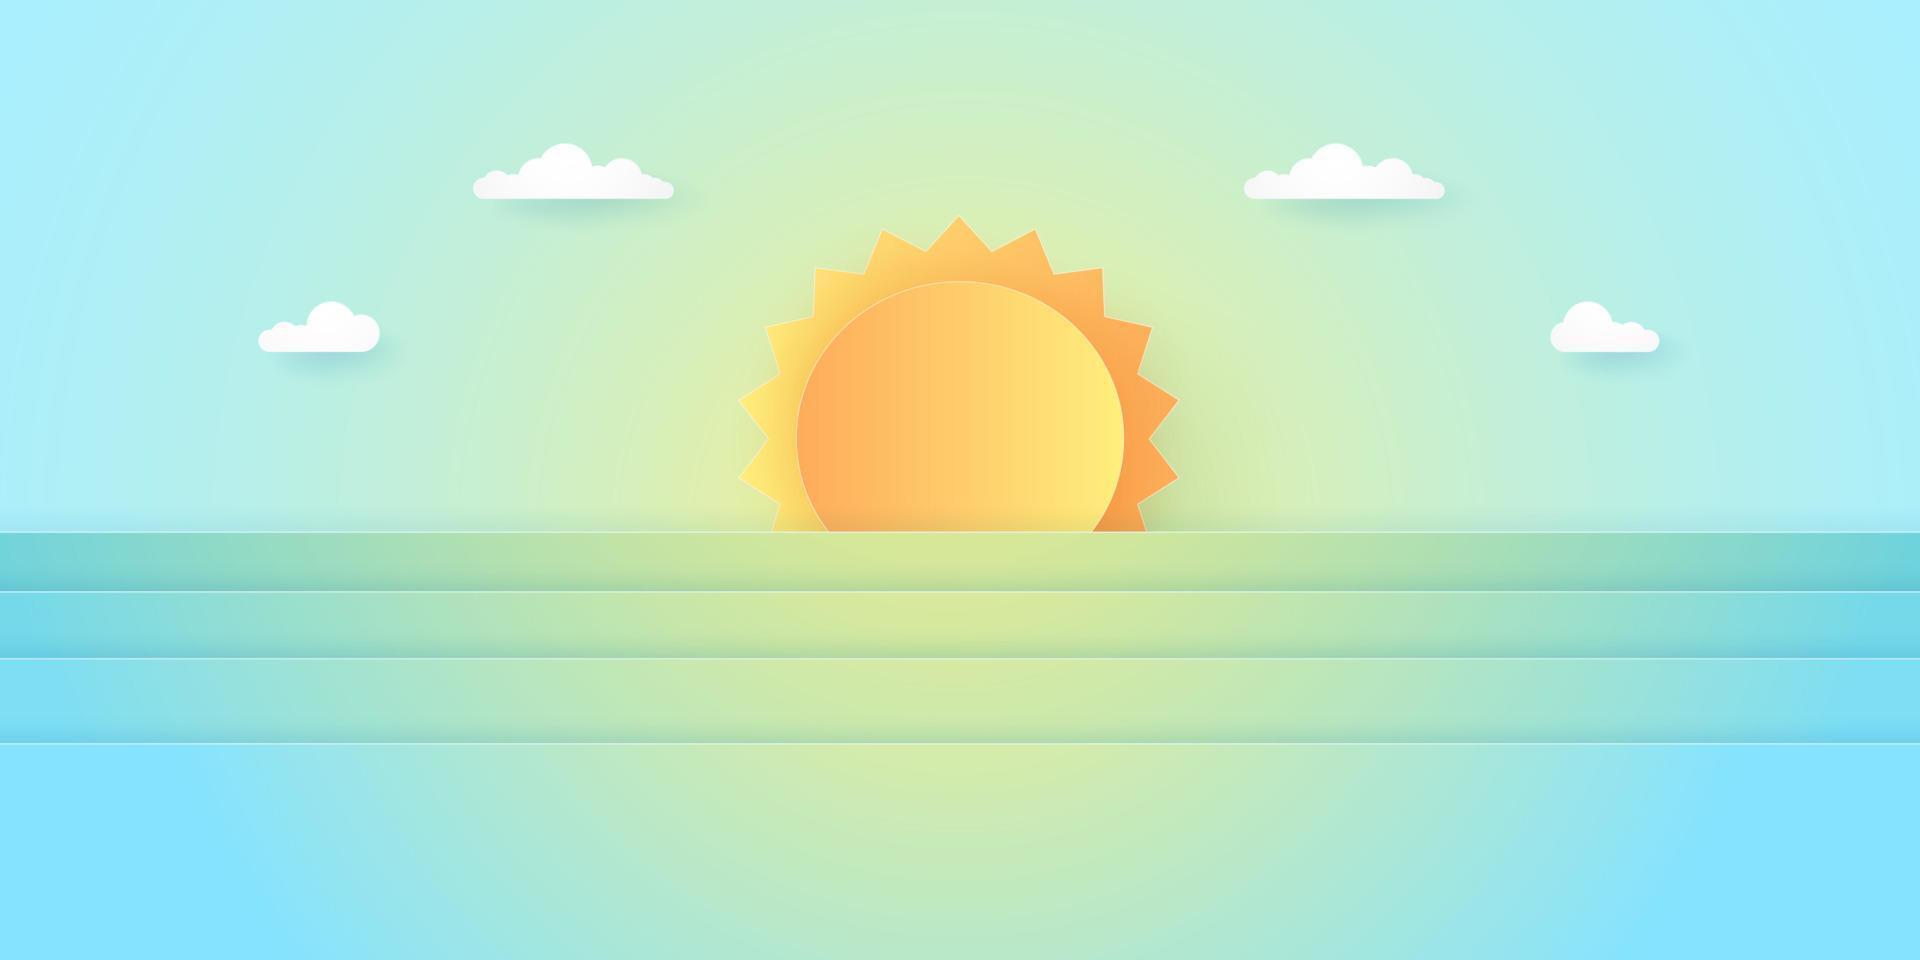 Summer Time, landscape, cloudy sky with bright sun, paper art style vector